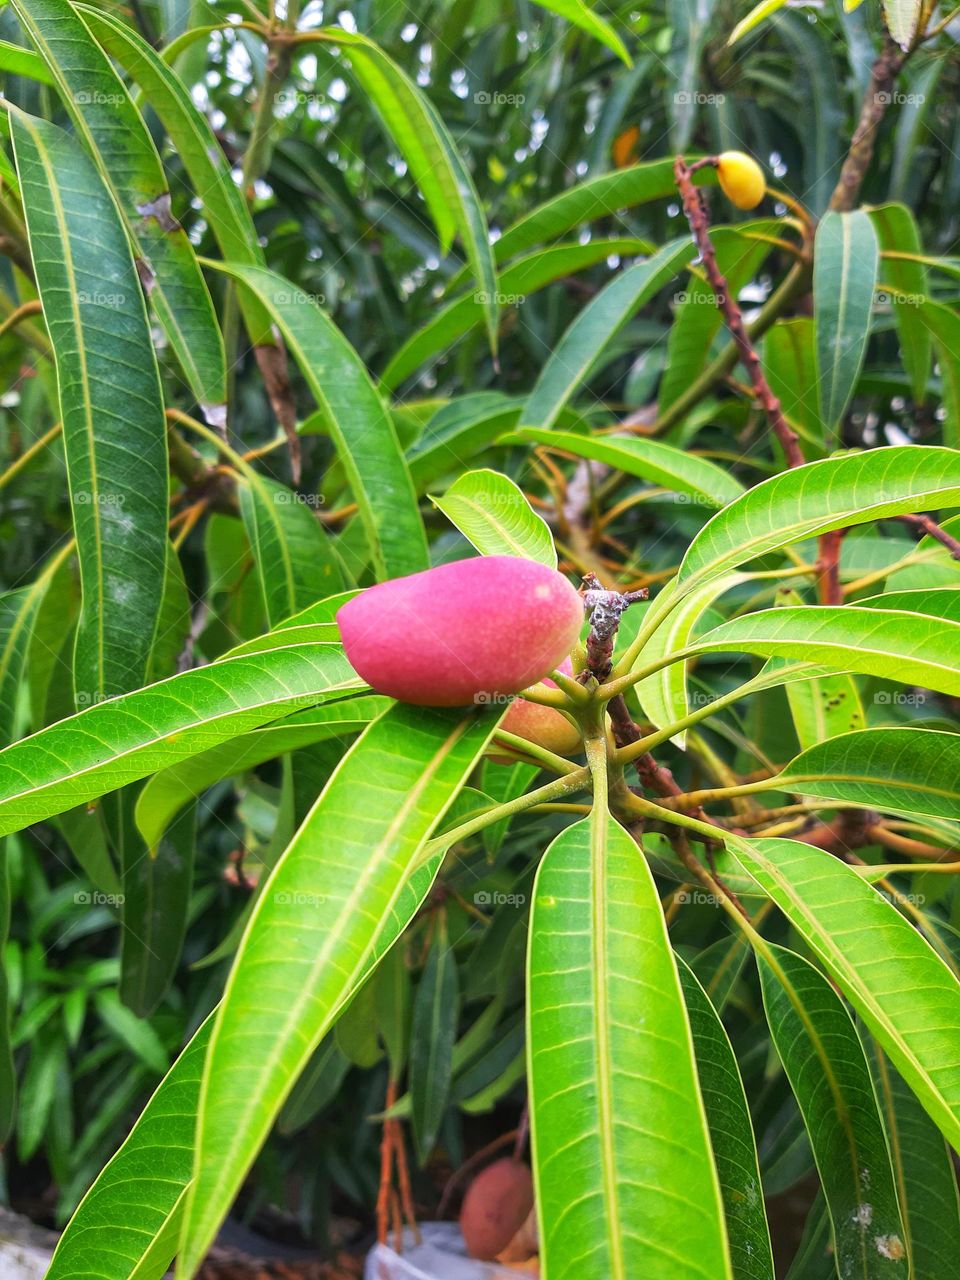 A red mini mango in a process of growing.